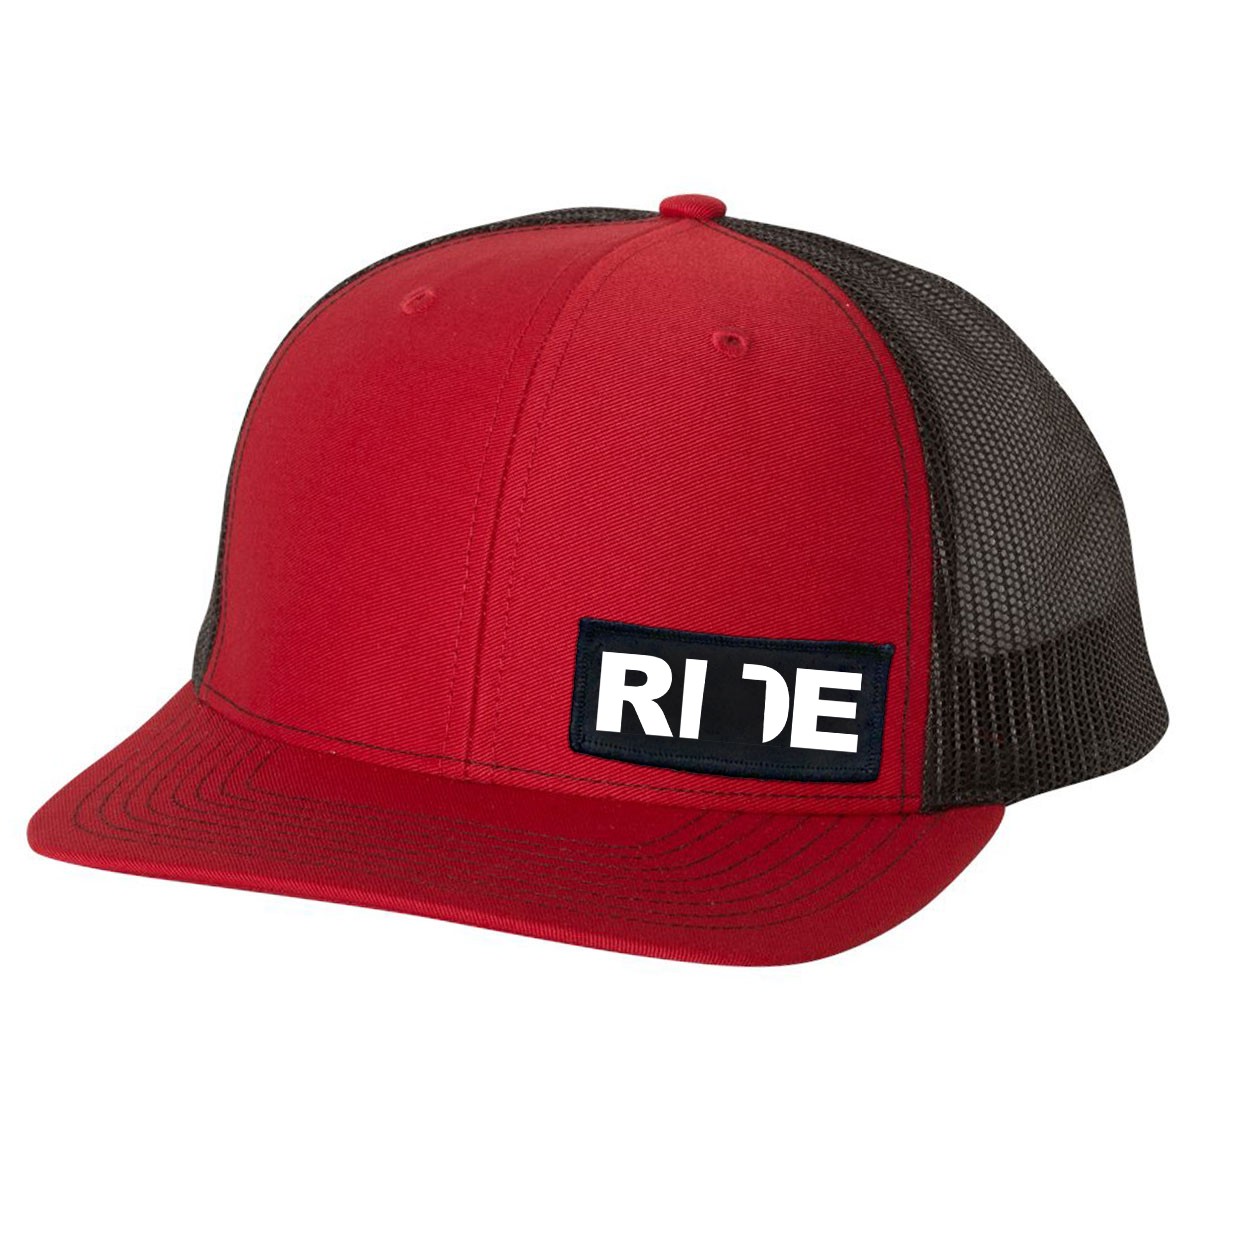 Ride Utah Night Out Woven Patch Snapback Trucker Hat Red/Black (White Logo)